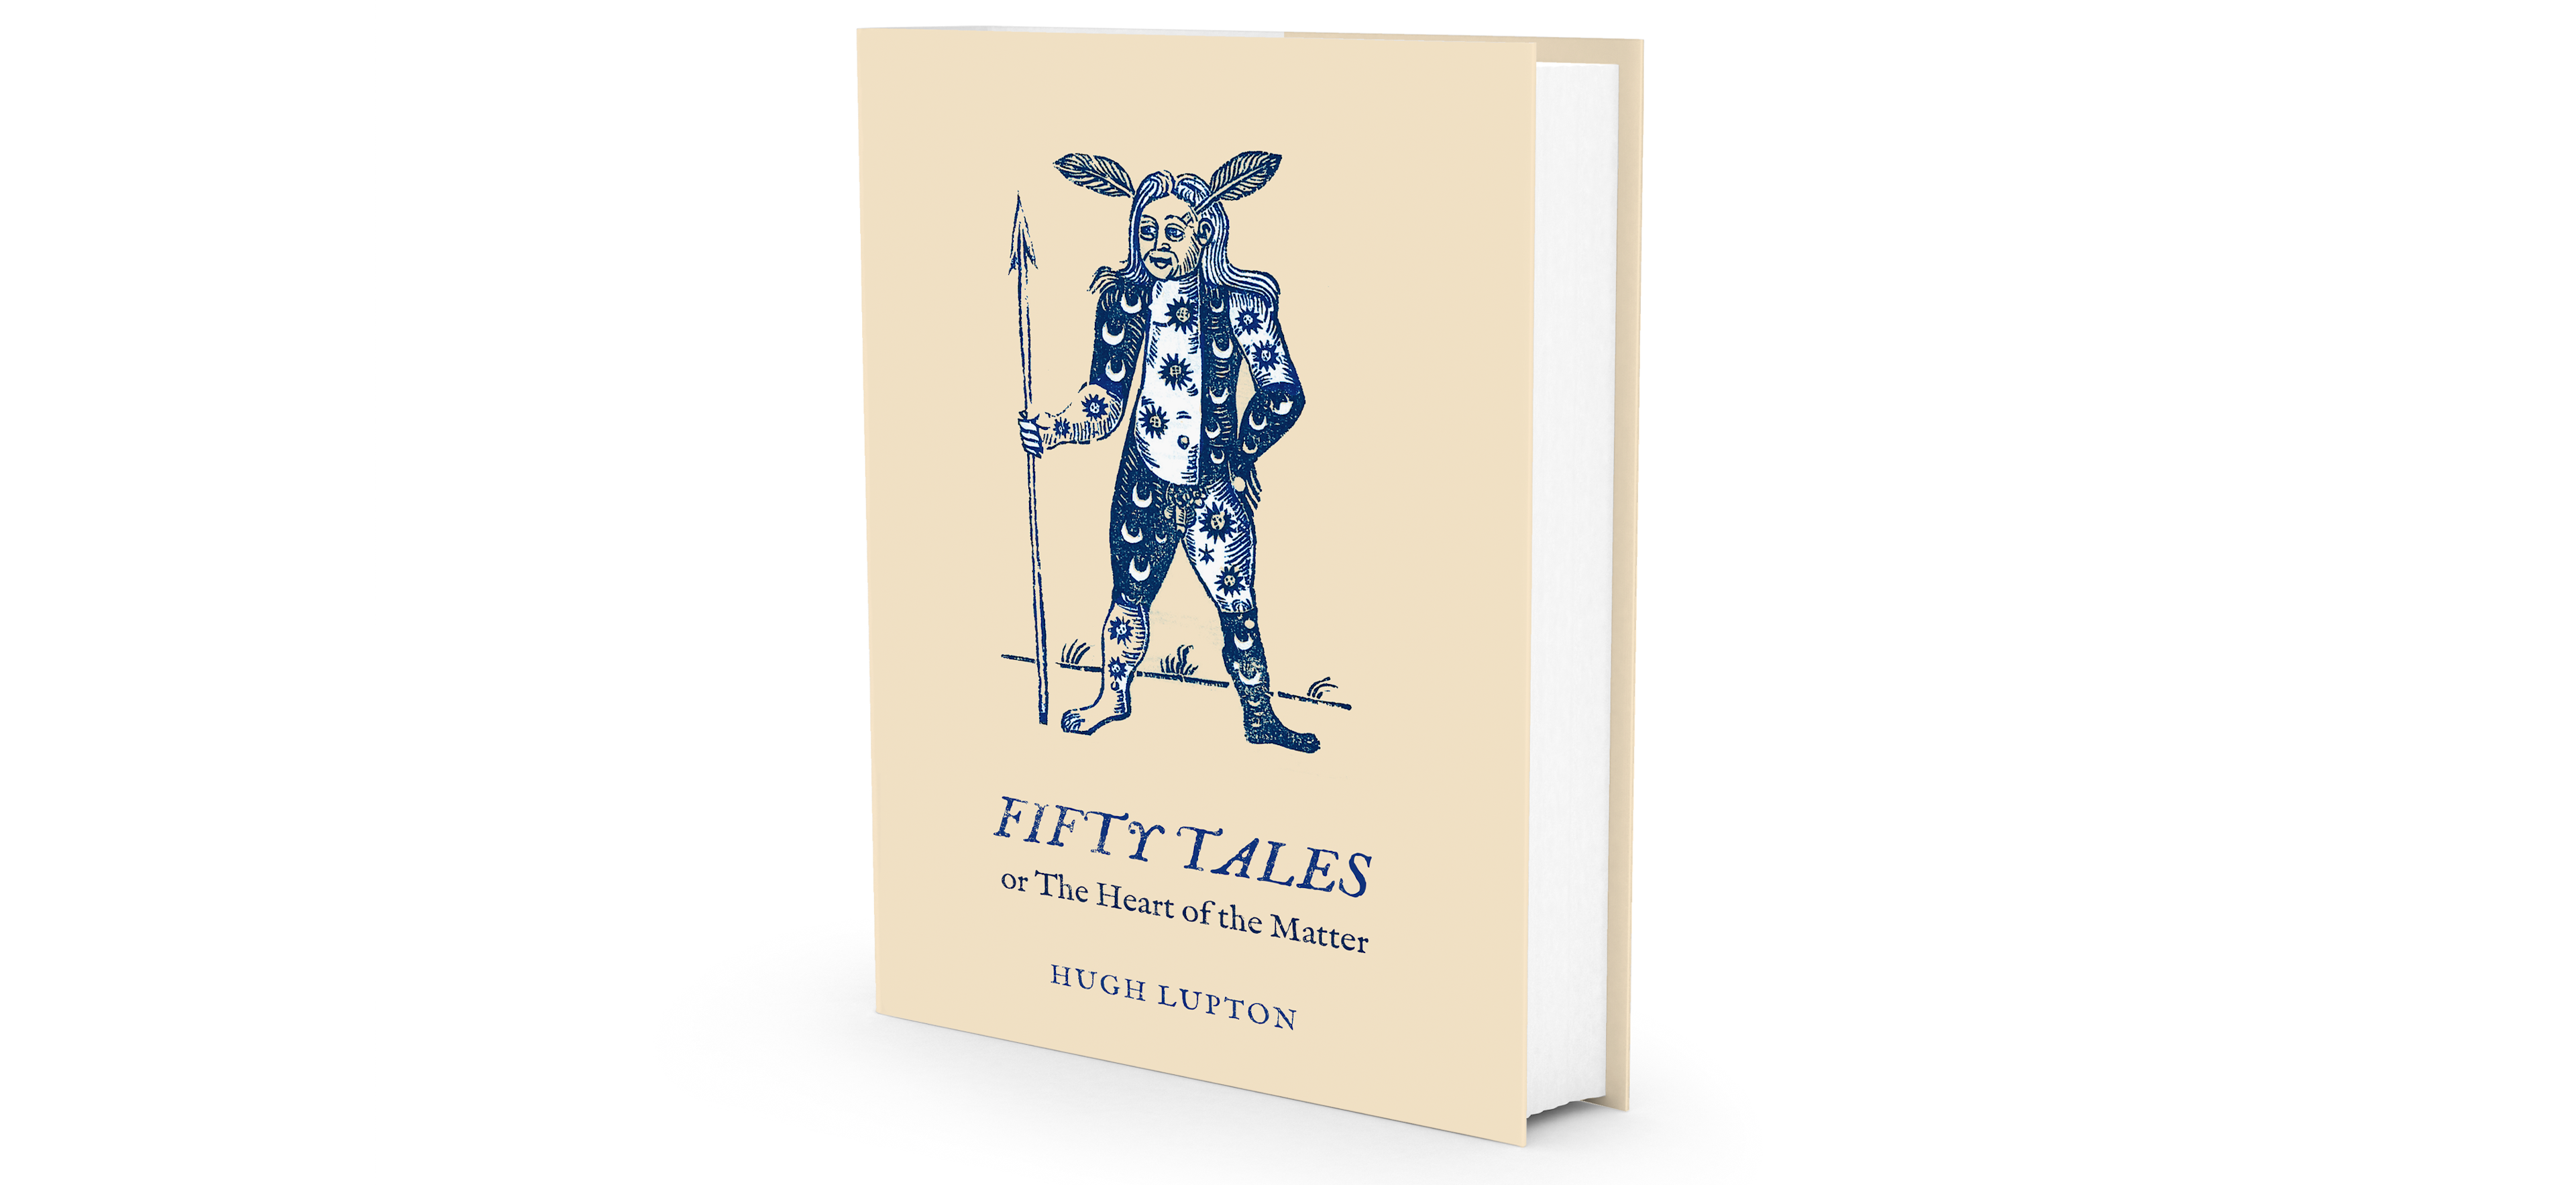 Fifty Tales, or The Heart of the Matter